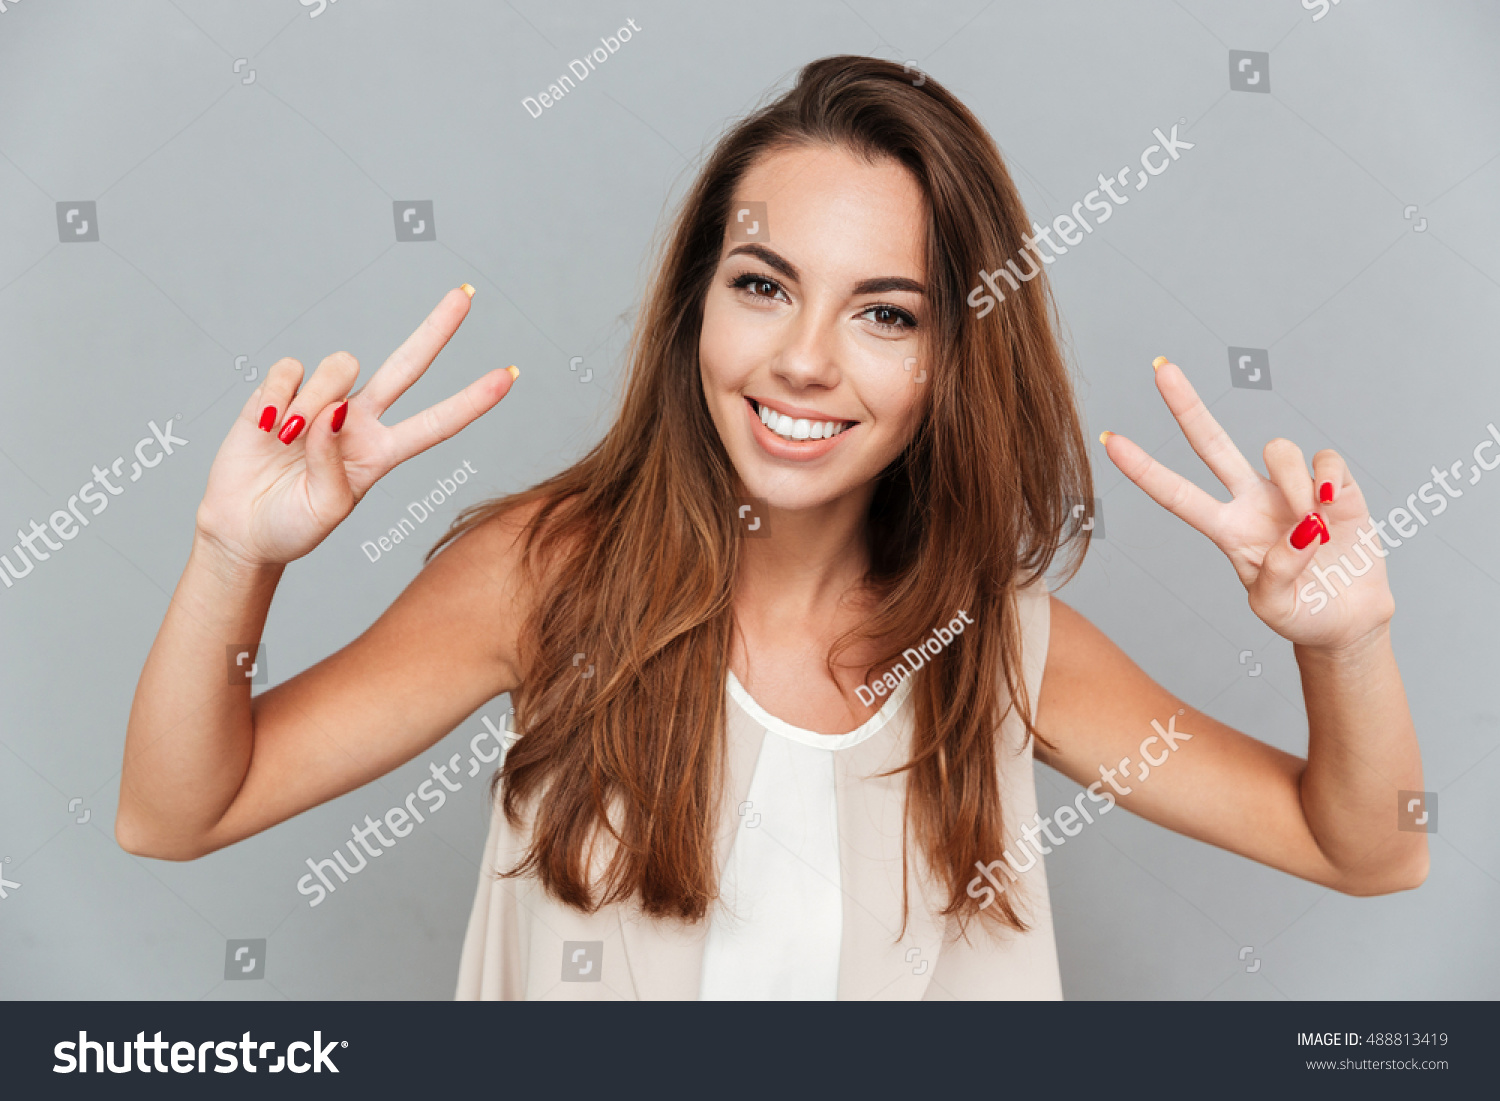 Happy beautiful young woman showing peace sign with both hands over grey background #488813419